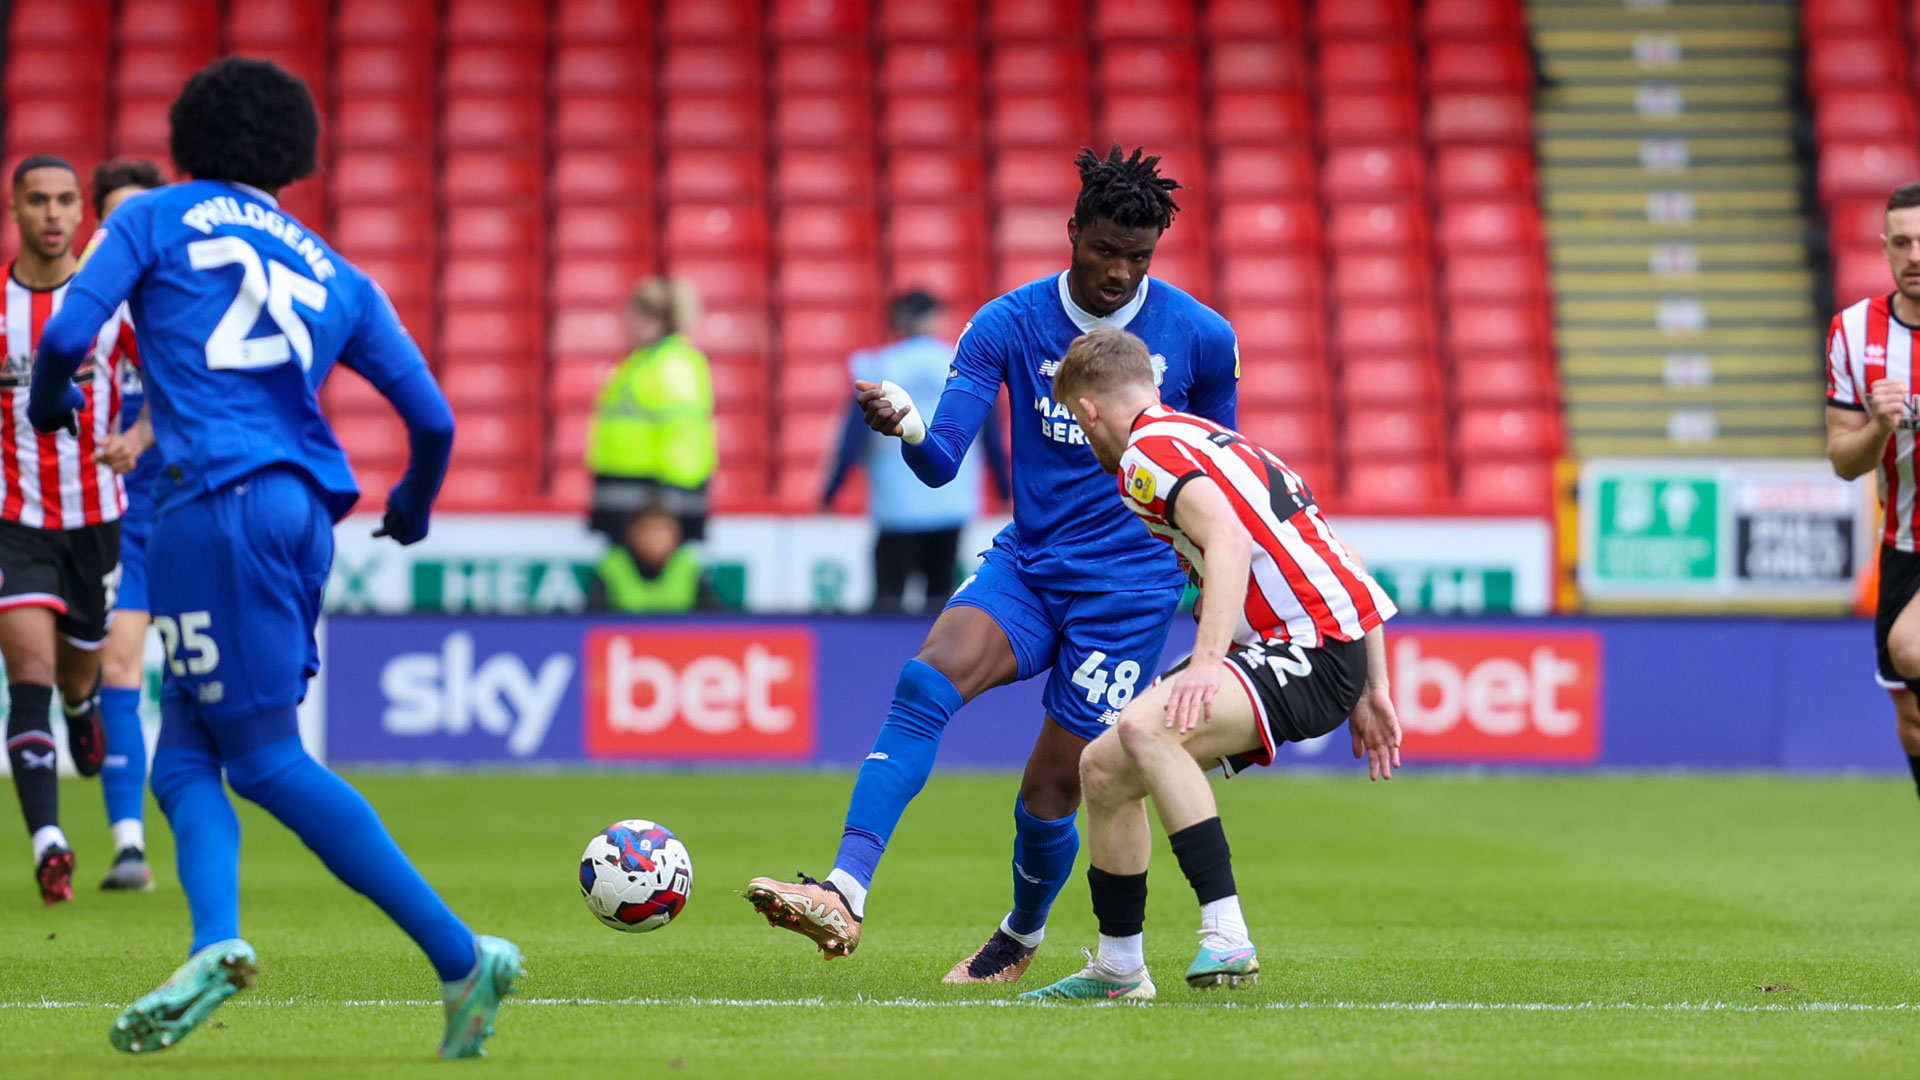 Sory Kaba in action against Sheffield United...